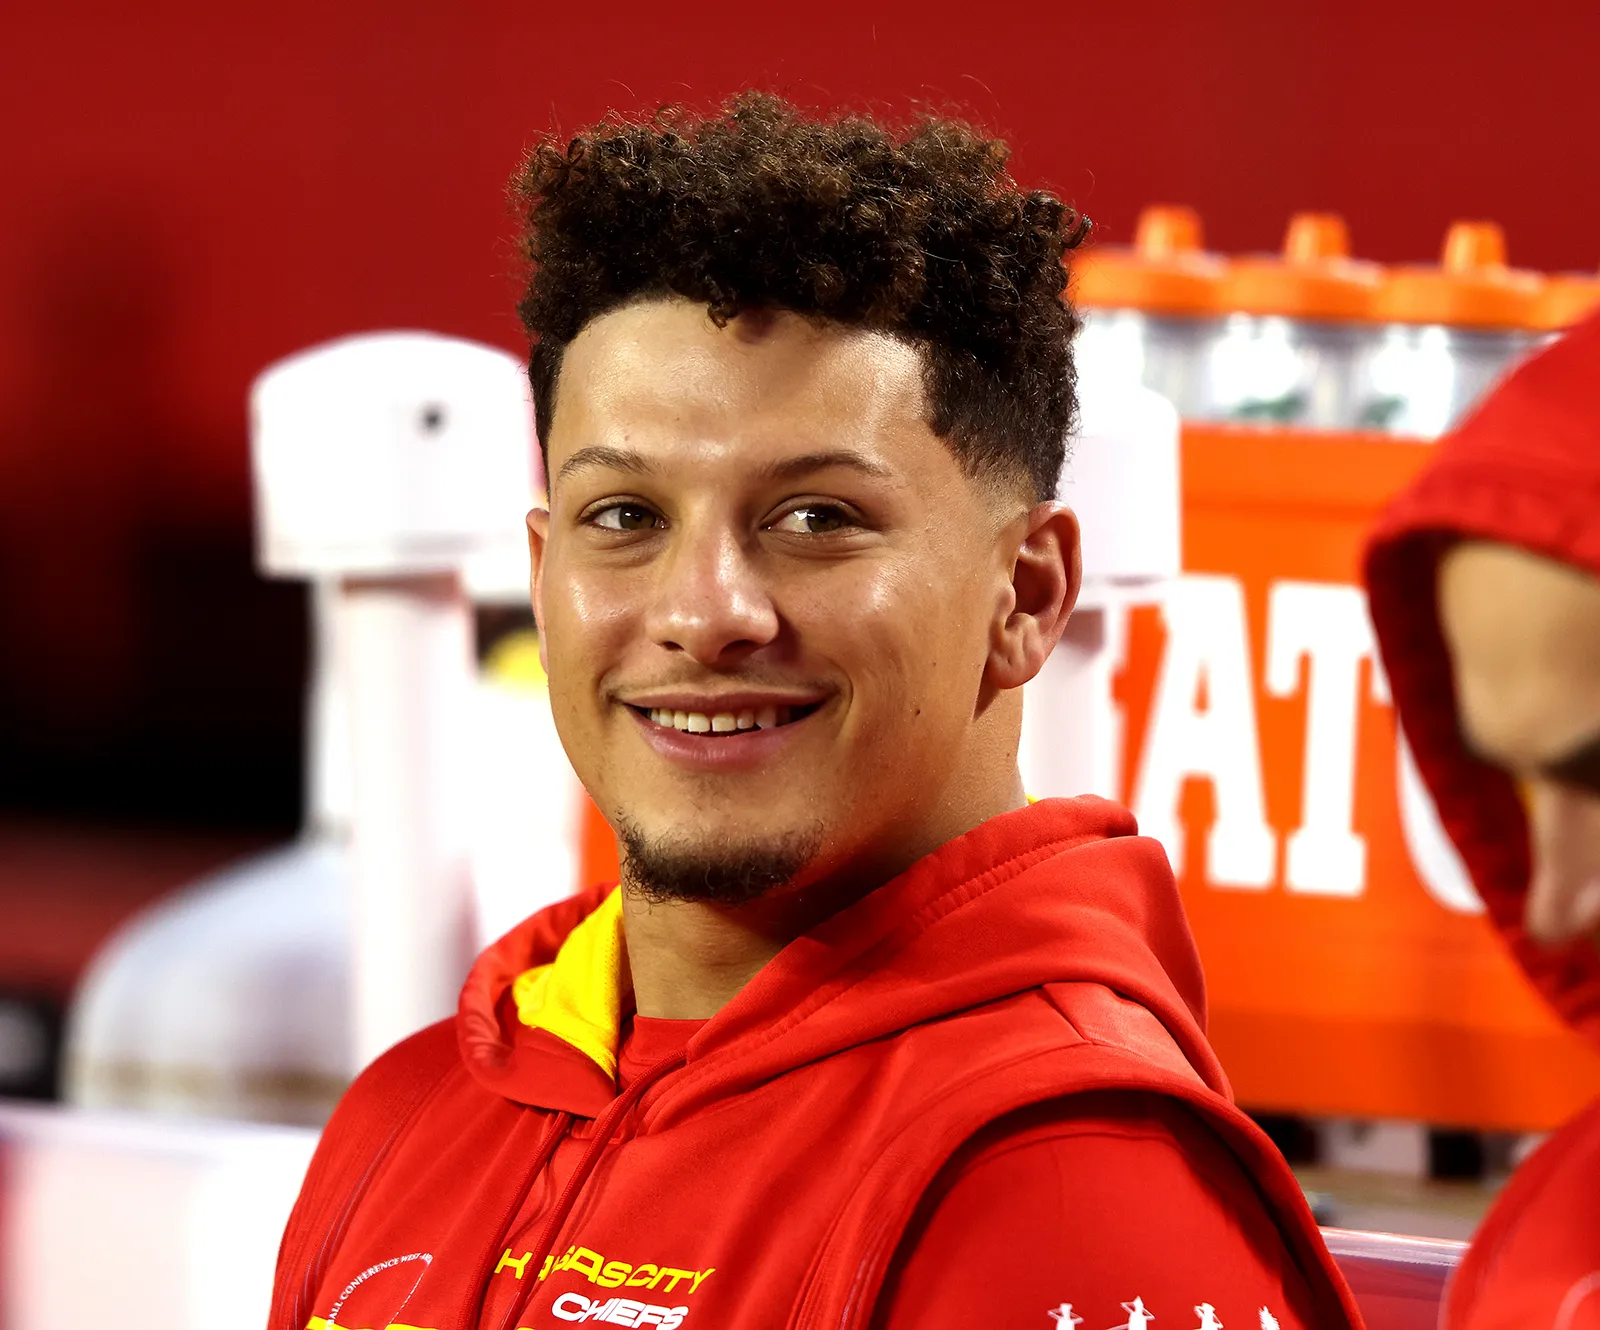 Patrick Mahomes reveals Taylor Swift's unknown side: Is he jeopardizing Andy Reid's job?